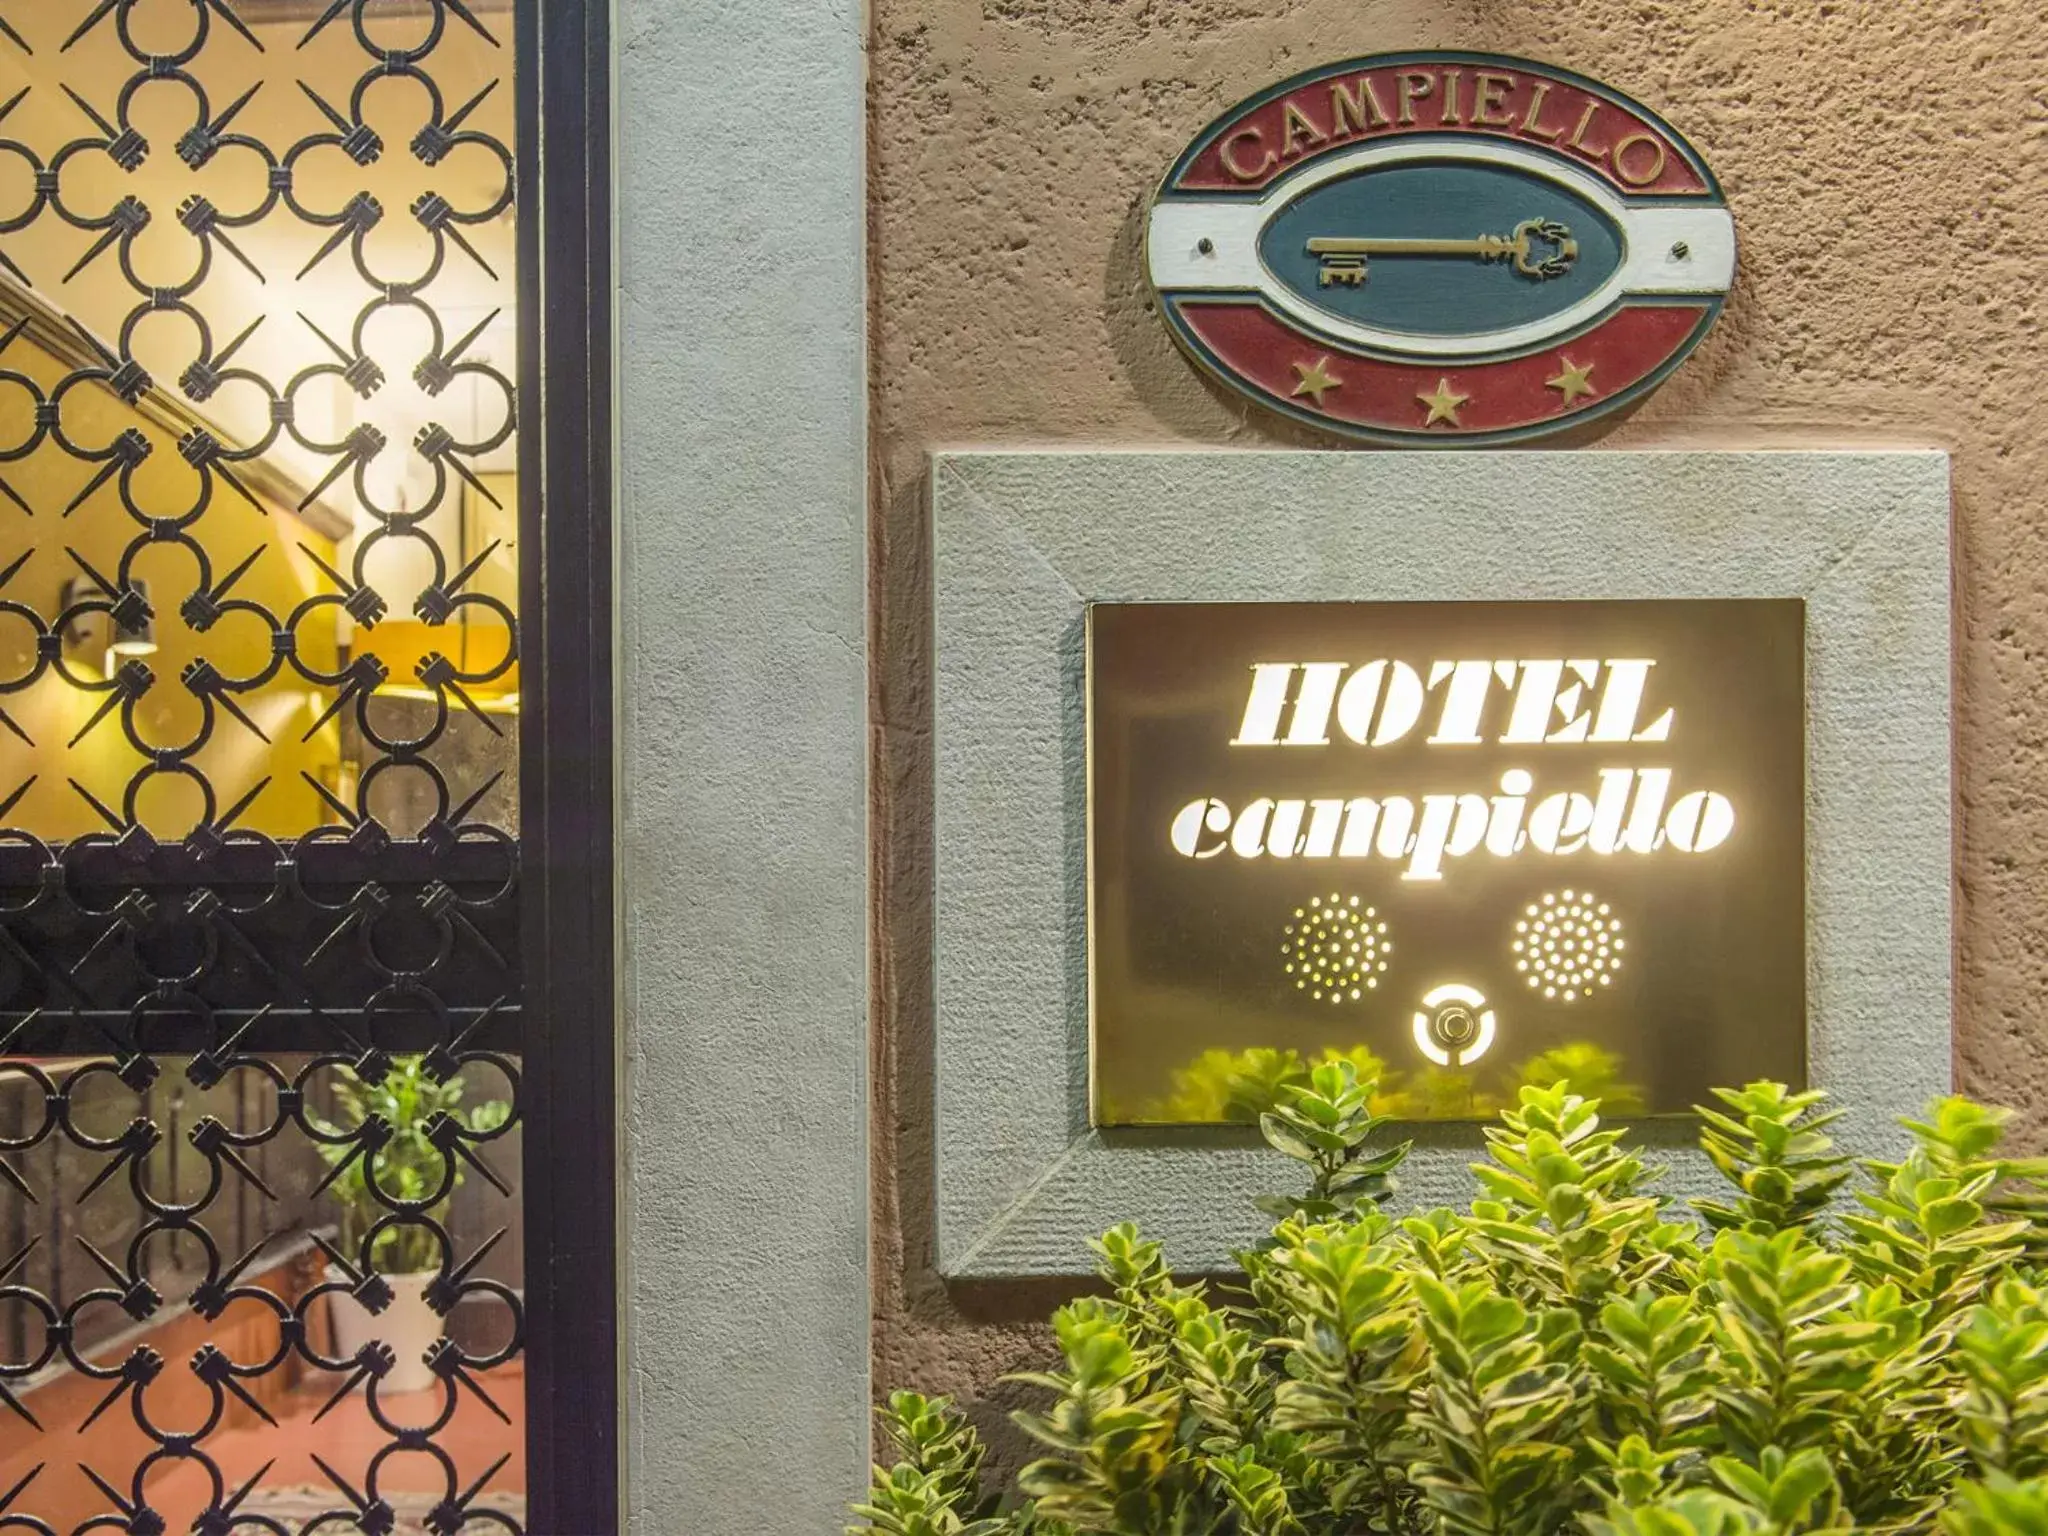 Property logo or sign in Hotel Campiello